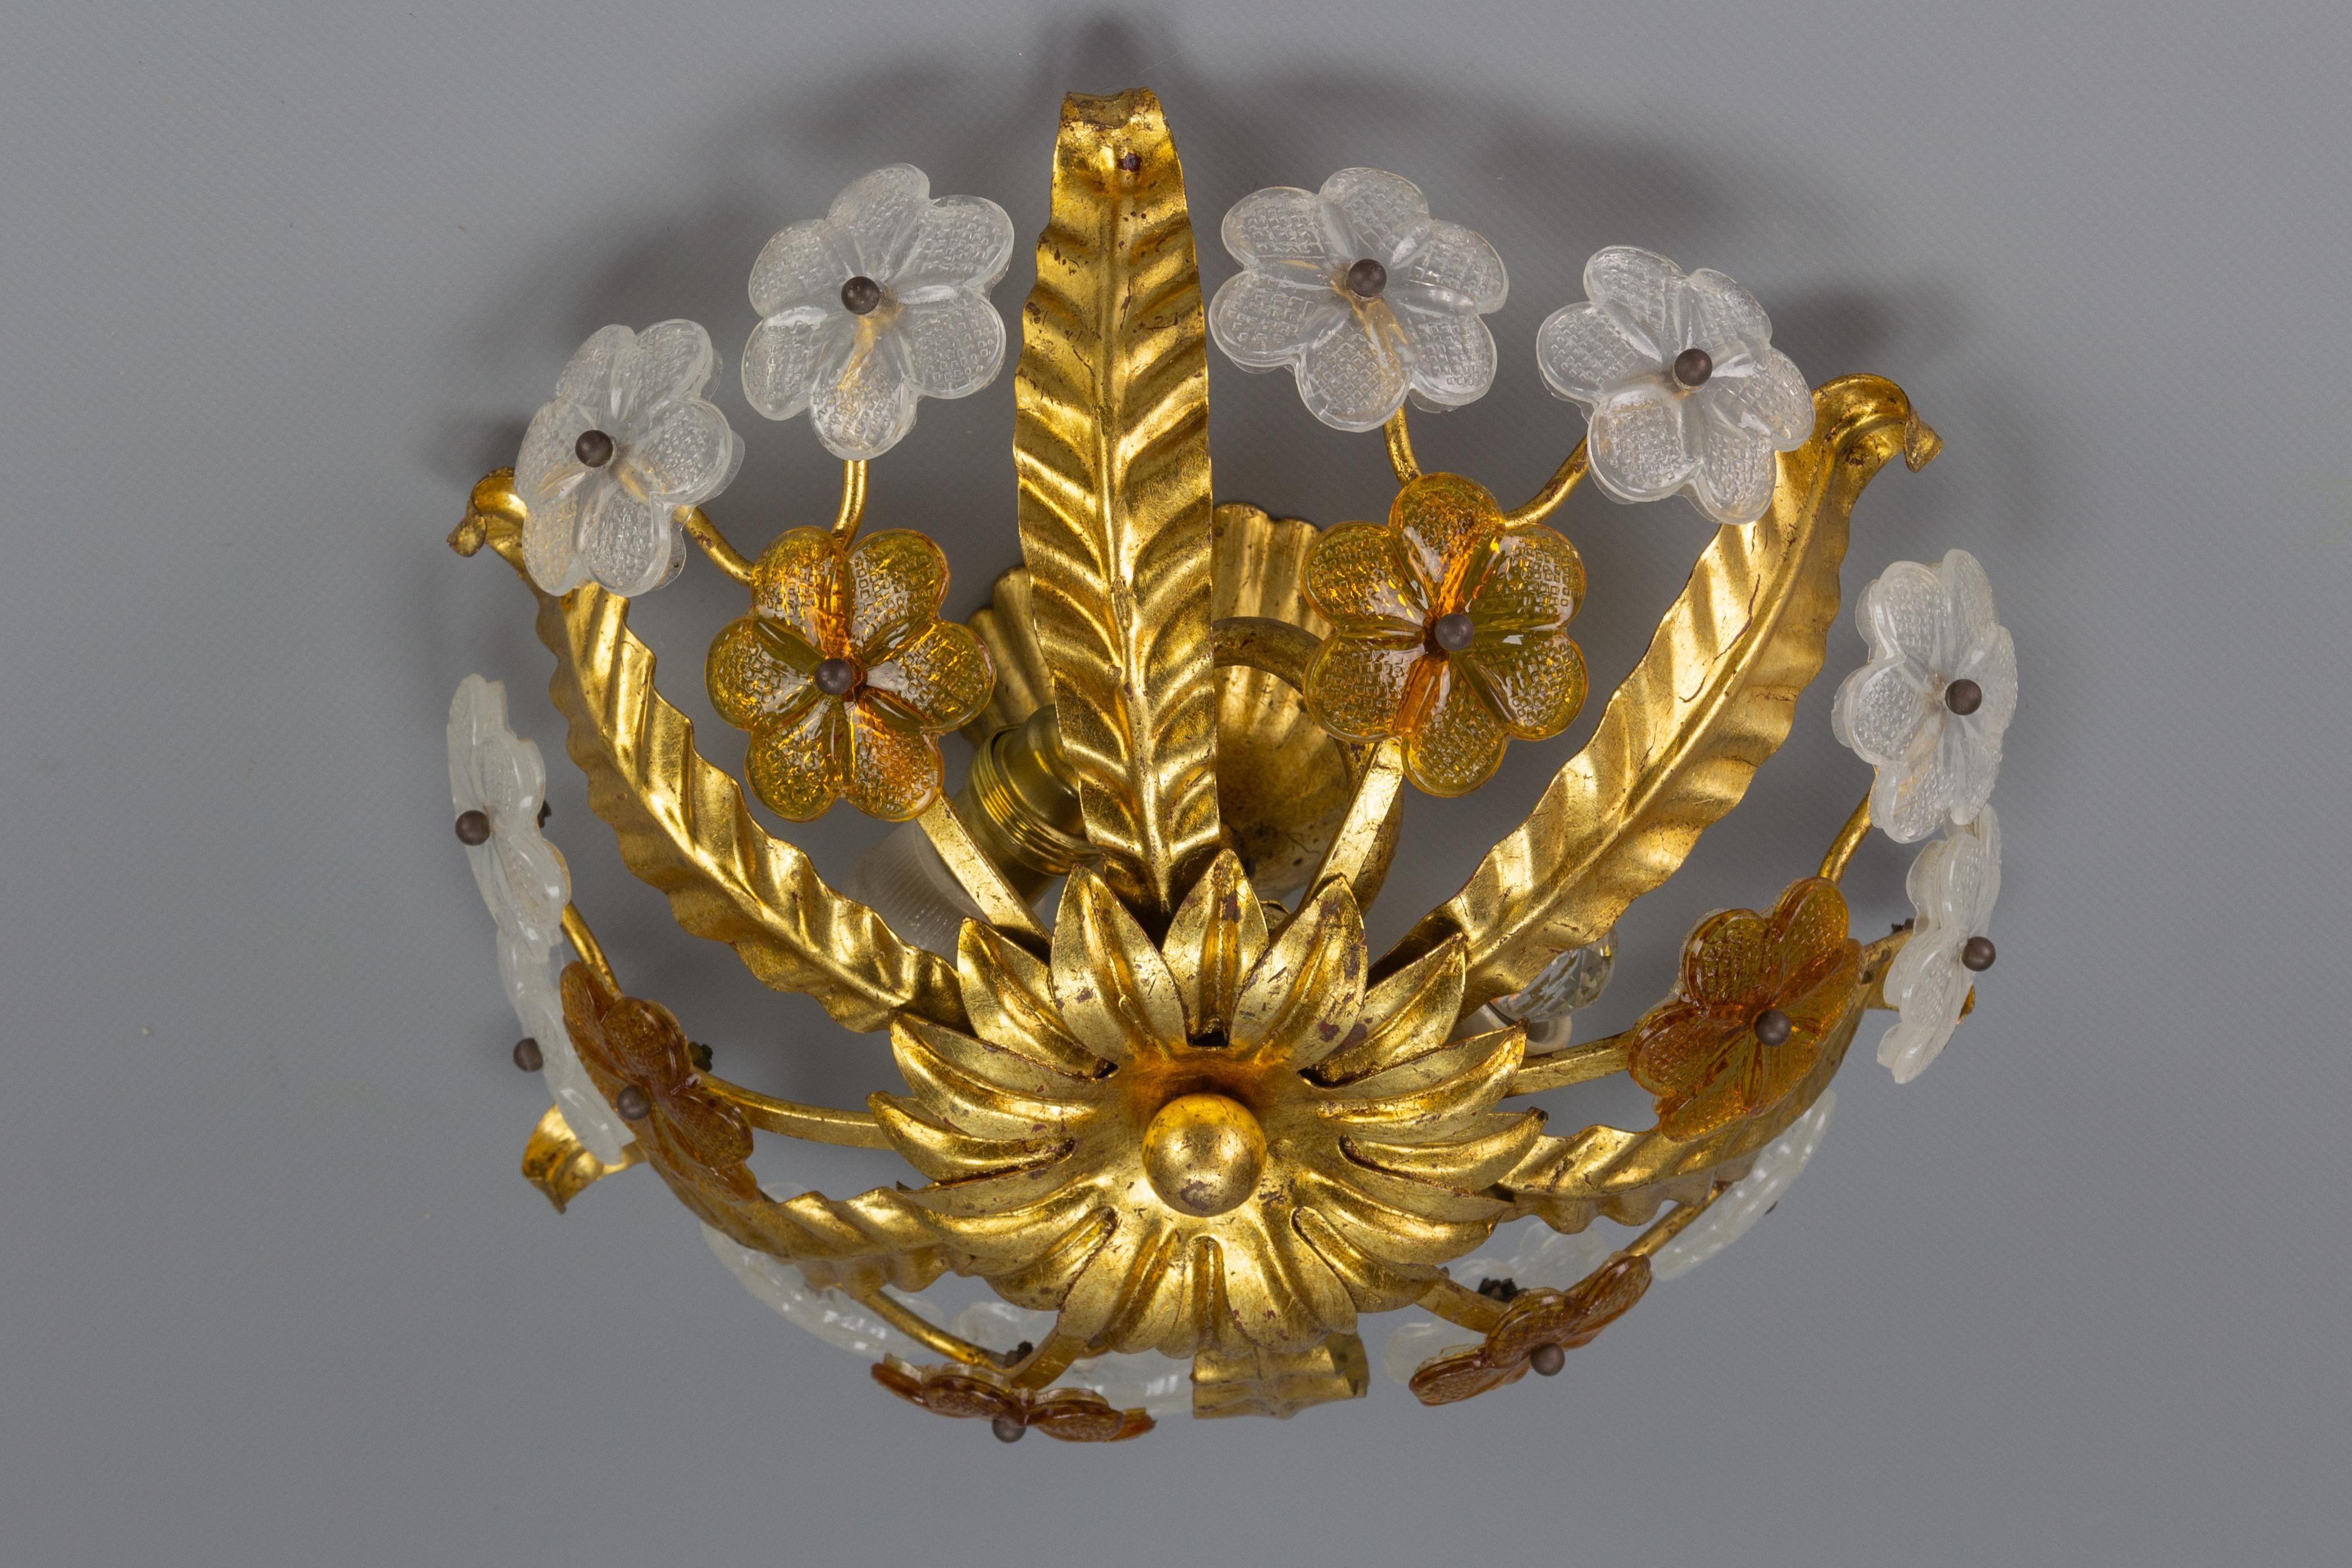 Adorable and compact Hollywood Regency-style ceiling light fixture. This vintage flush mount features a gilt tole leaf-shaped frame that is adorned with white and brown glass flowers. It looks beautiful lit as well as unlit. Germany, 1960s.
Two